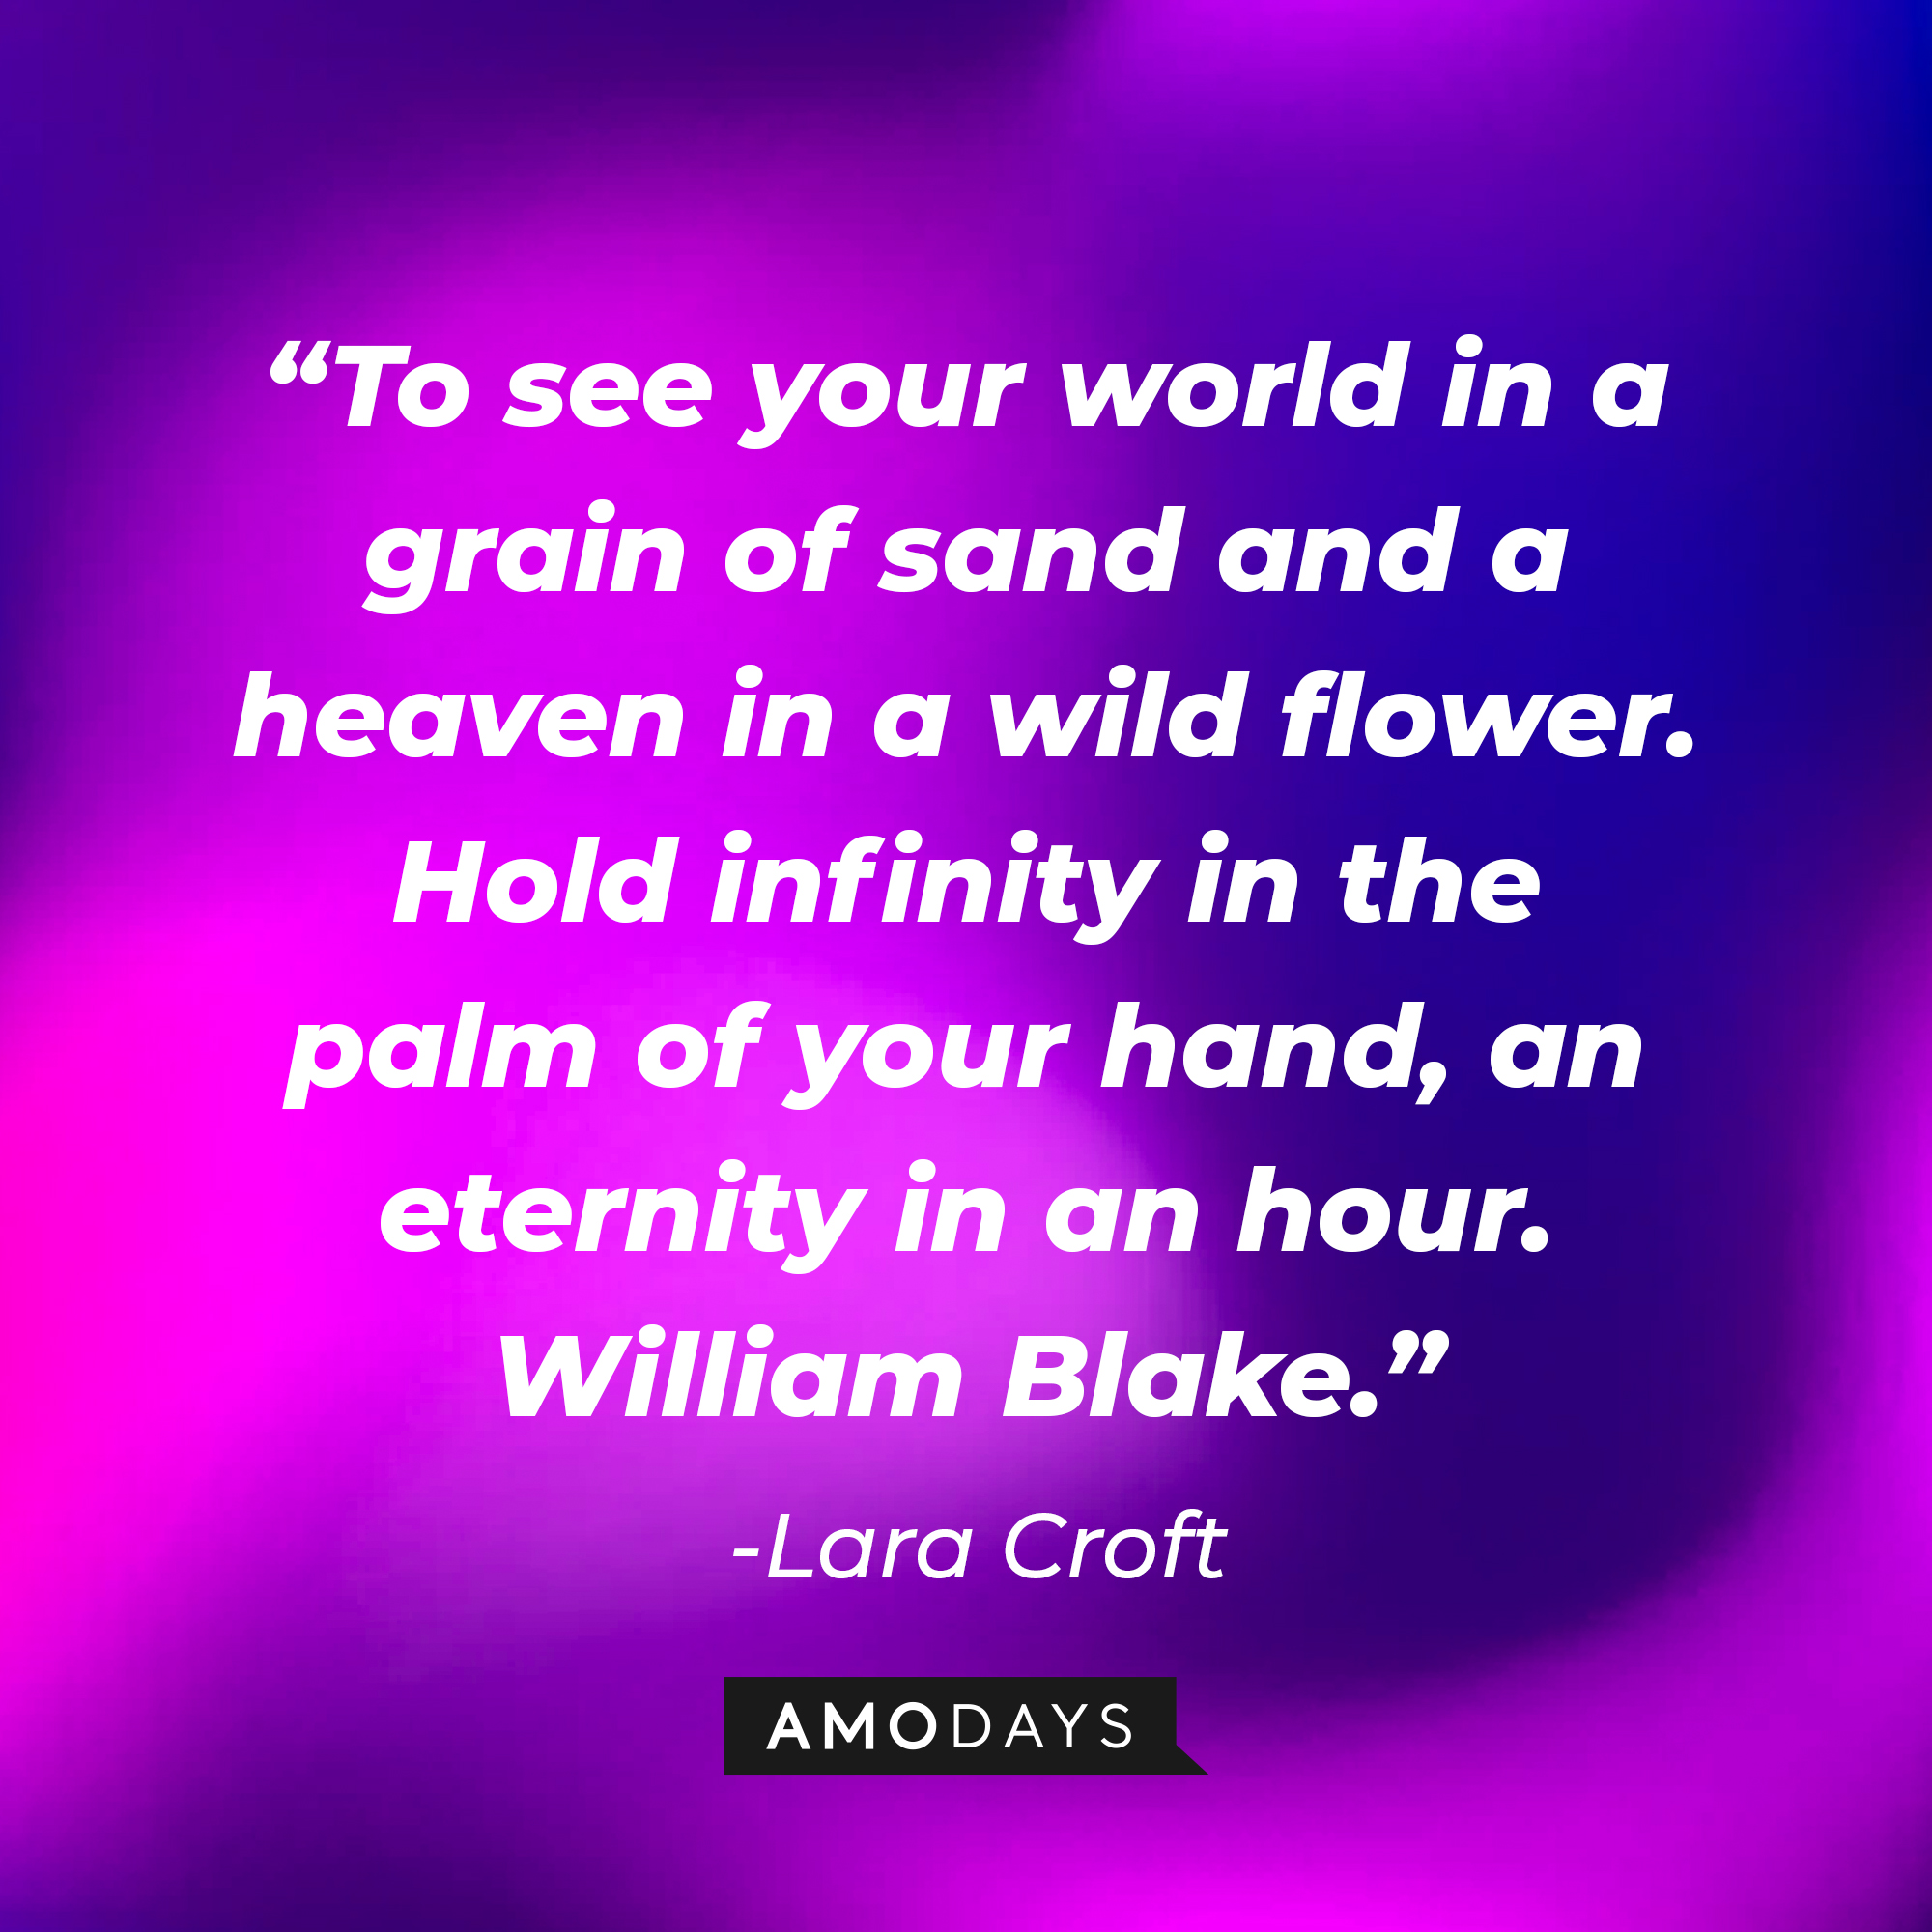 Lara Croft's quote: "To see your world in a grain of sand and a heaven in a wild flower. Hold infinity in the palm of your hand, an eternity in an hour. William Blake." | Source: AmoDays